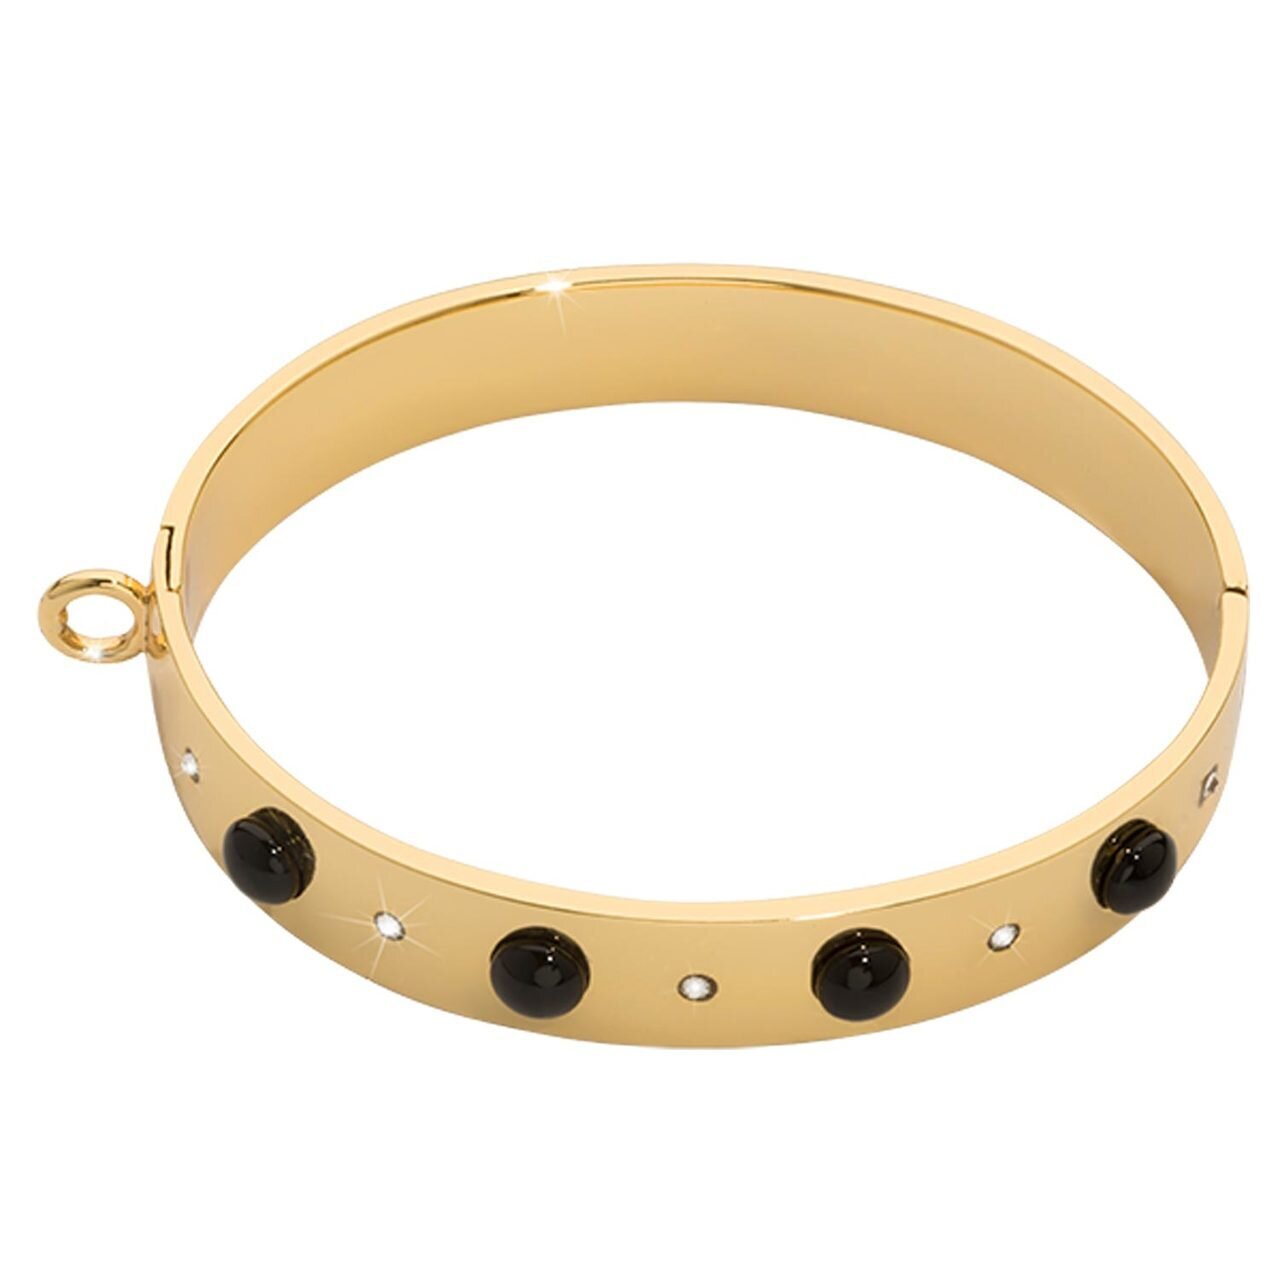 Nikki Lissoni Bangle of 1cm with Black Pearls Swarovski Crystals One Loop To Attach A Charm Gold-plated 17cm B1144G17